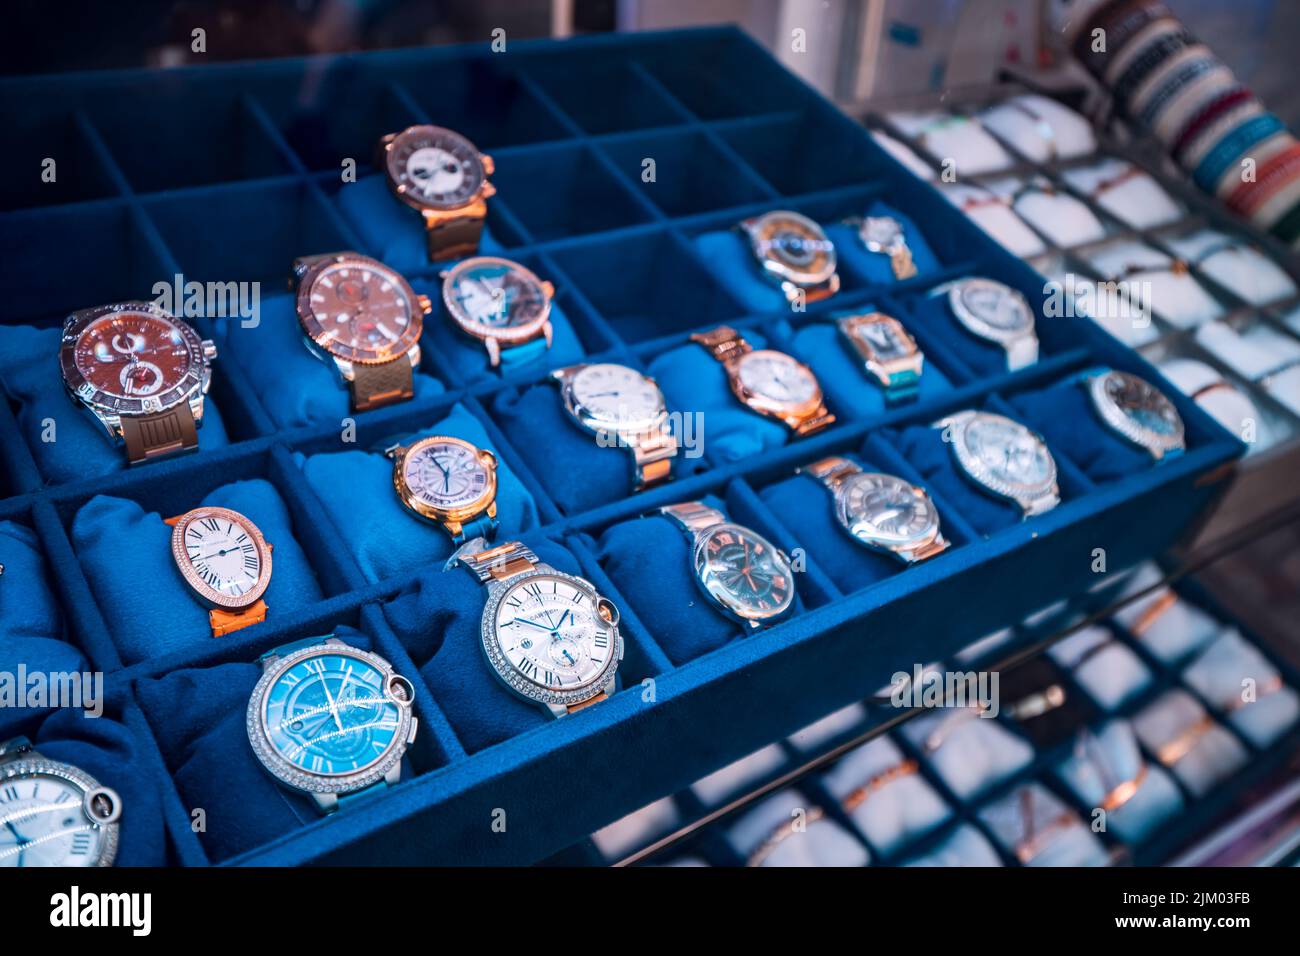 21 June 2022, Antalya, Turkey: Many vintage retro and modern Cartier luxury wristwaches and clocks for sale at store window Stock Photo